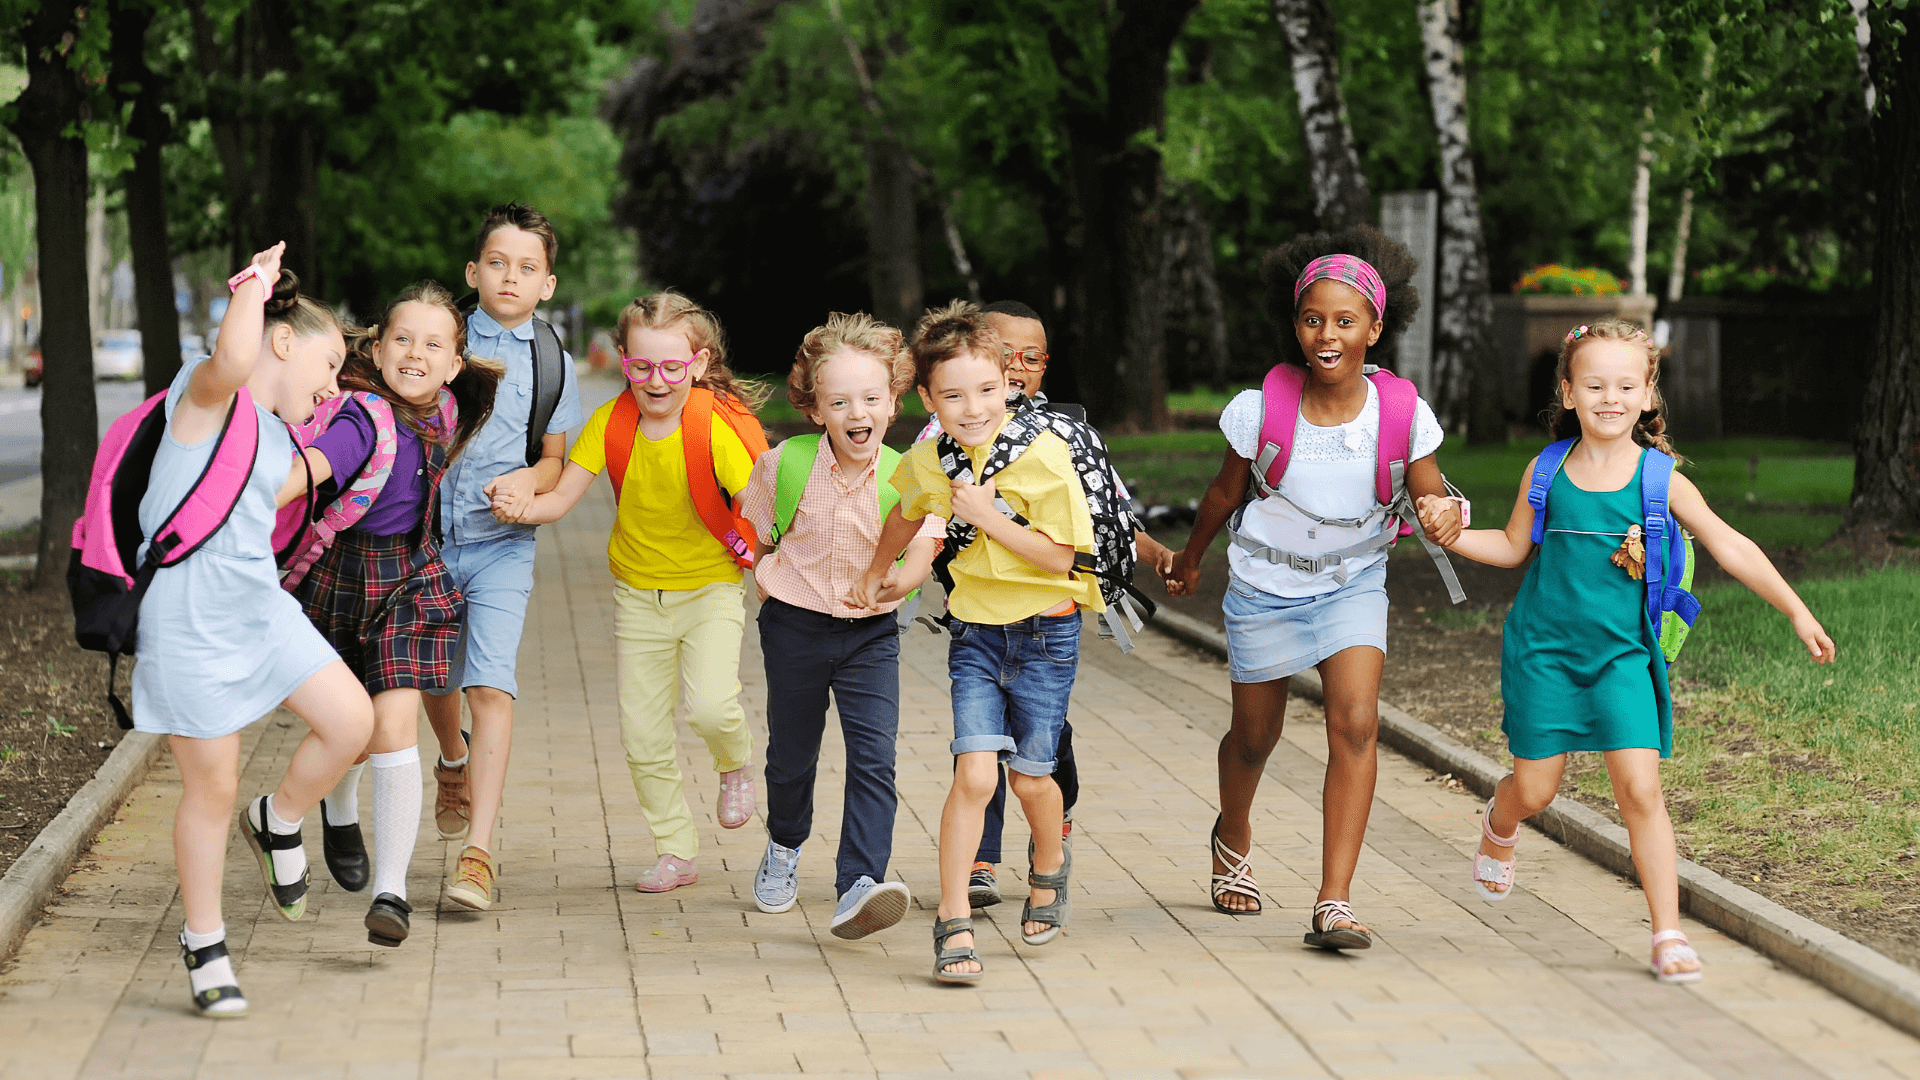 A group of kids with backpacks holding hands and running on a sidewalk